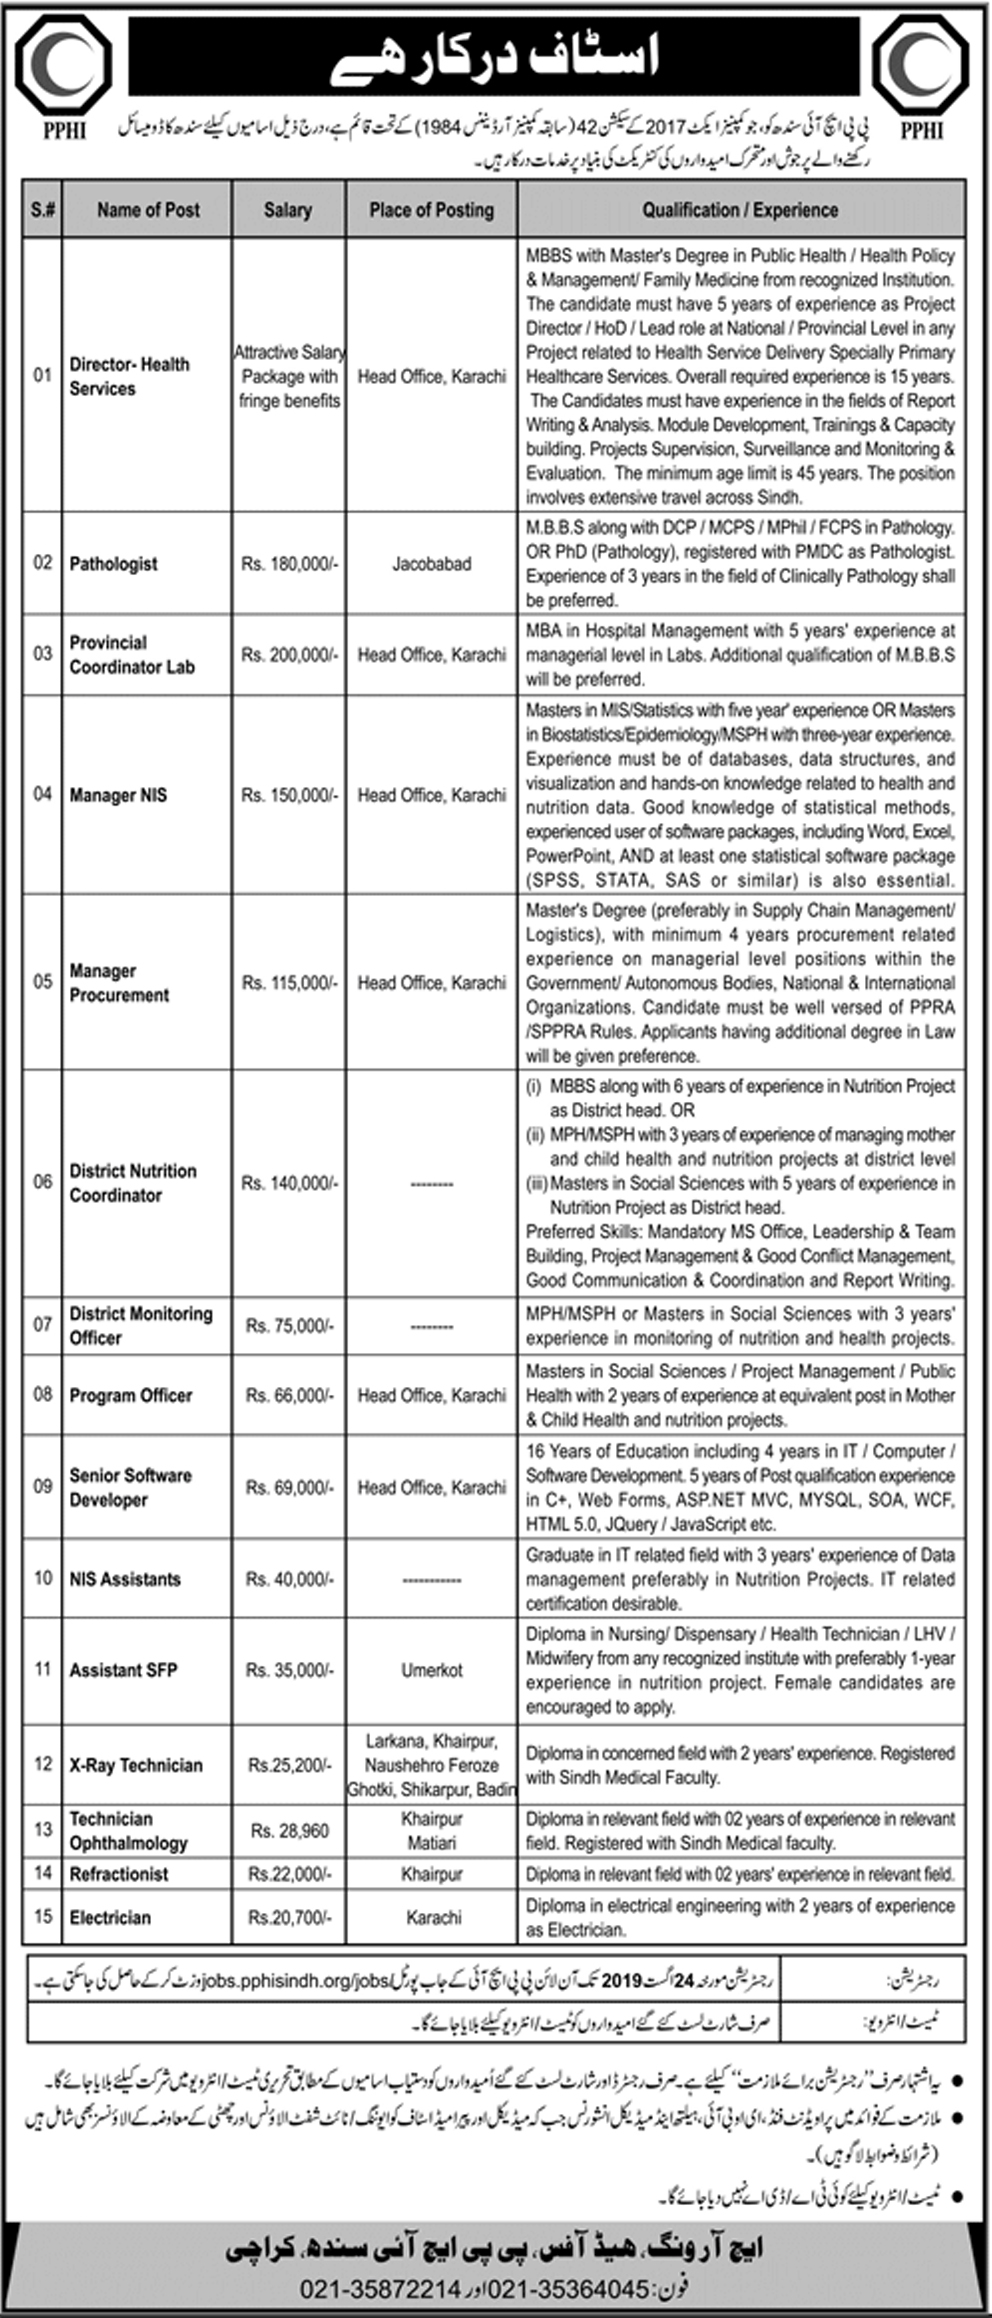 Peoples Primary HealthCare Initiative Sindh PPHI jobs 2019